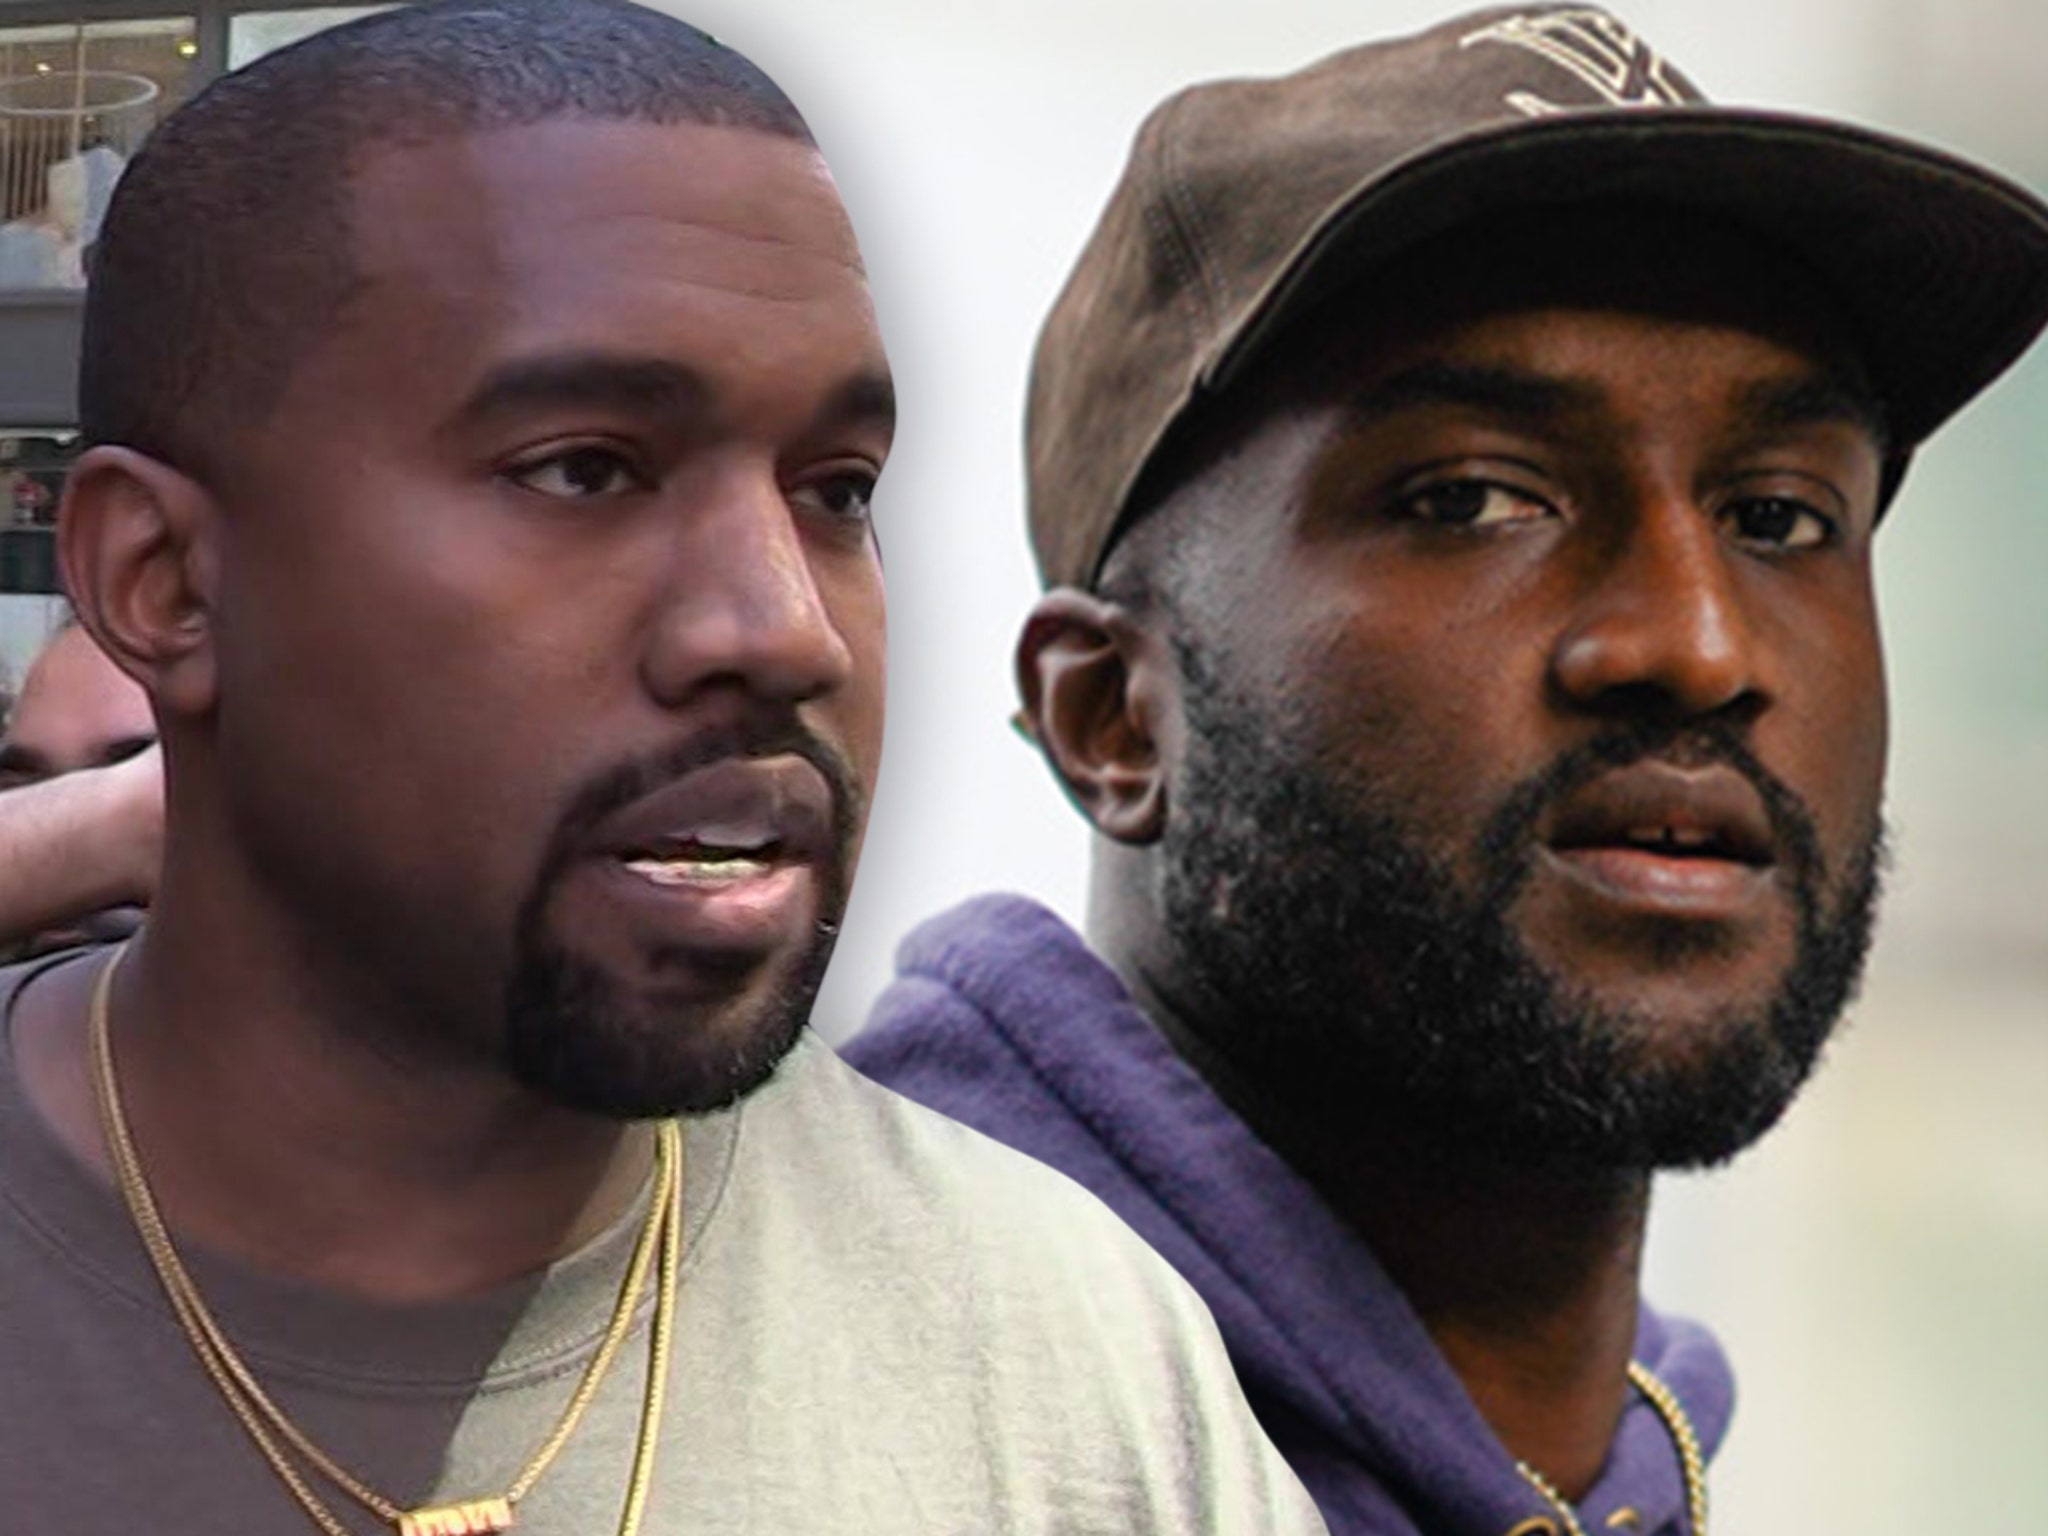 Paris fashion star Virgil Abloh pays tribute to Kanye West – a move to heal  the hurt?